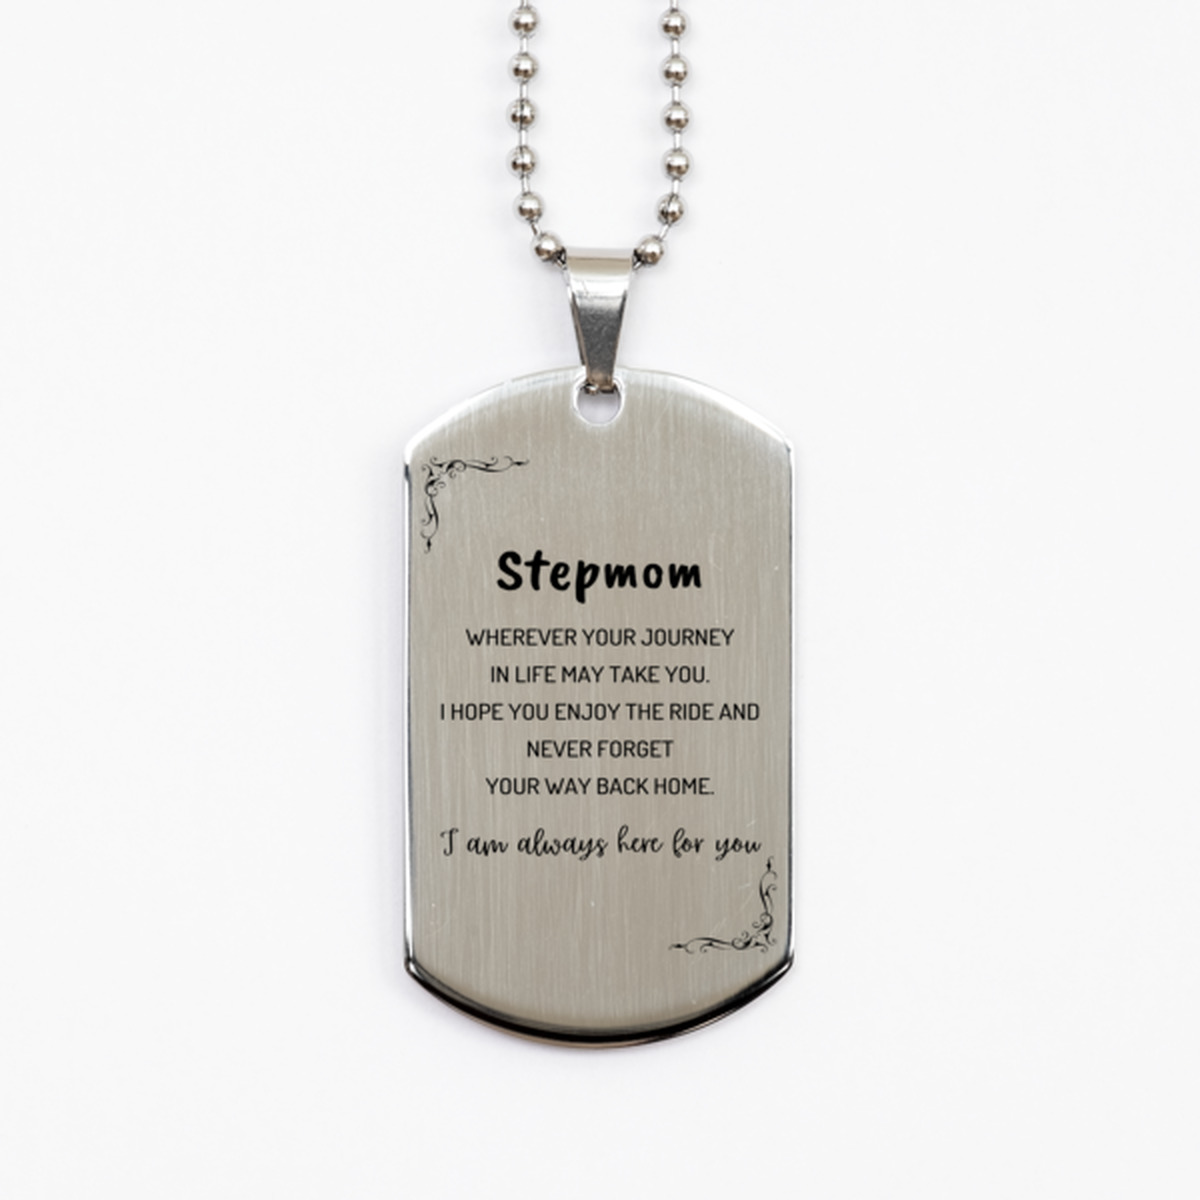 Stepmom wherever your journey in life may take you, I am always here for you Stepmom Silver Dog Tag, Awesome Christmas Gifts For Stepmom, Stepmom Birthday Gifts for Men Women Family Loved One